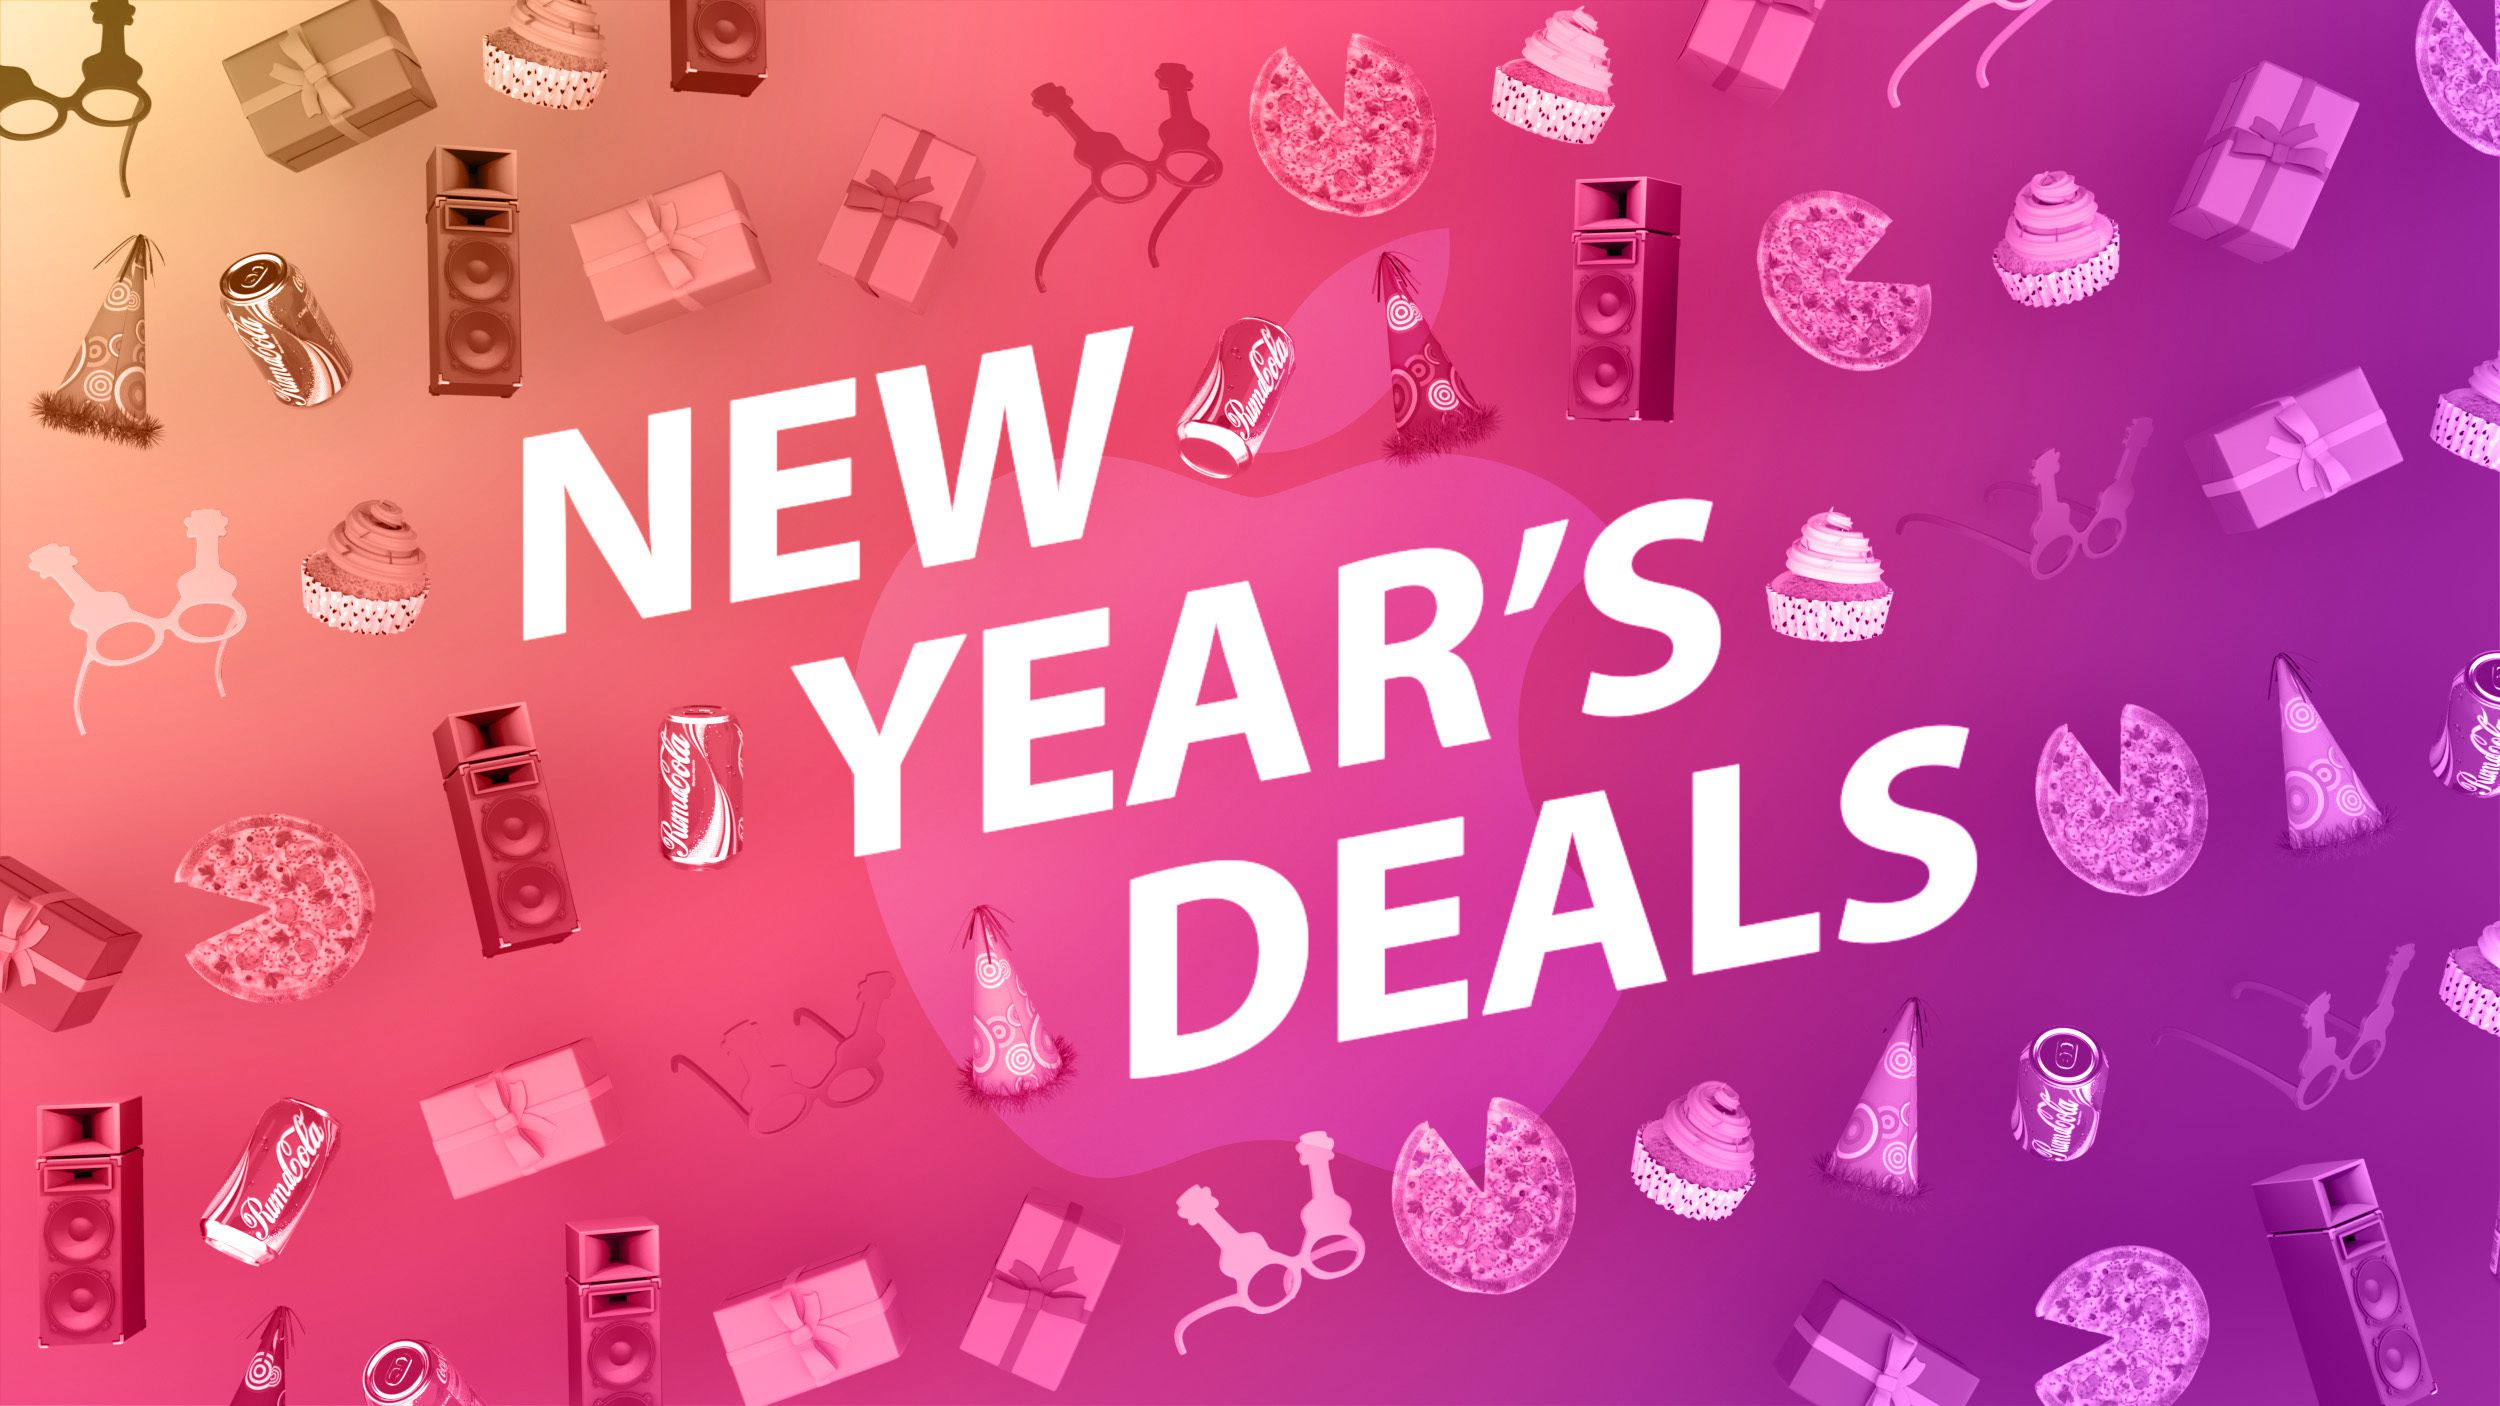 New Year’s offers: buy the best holiday discounts on Apple accessories From Twelve South, Mophie, Nomad and more